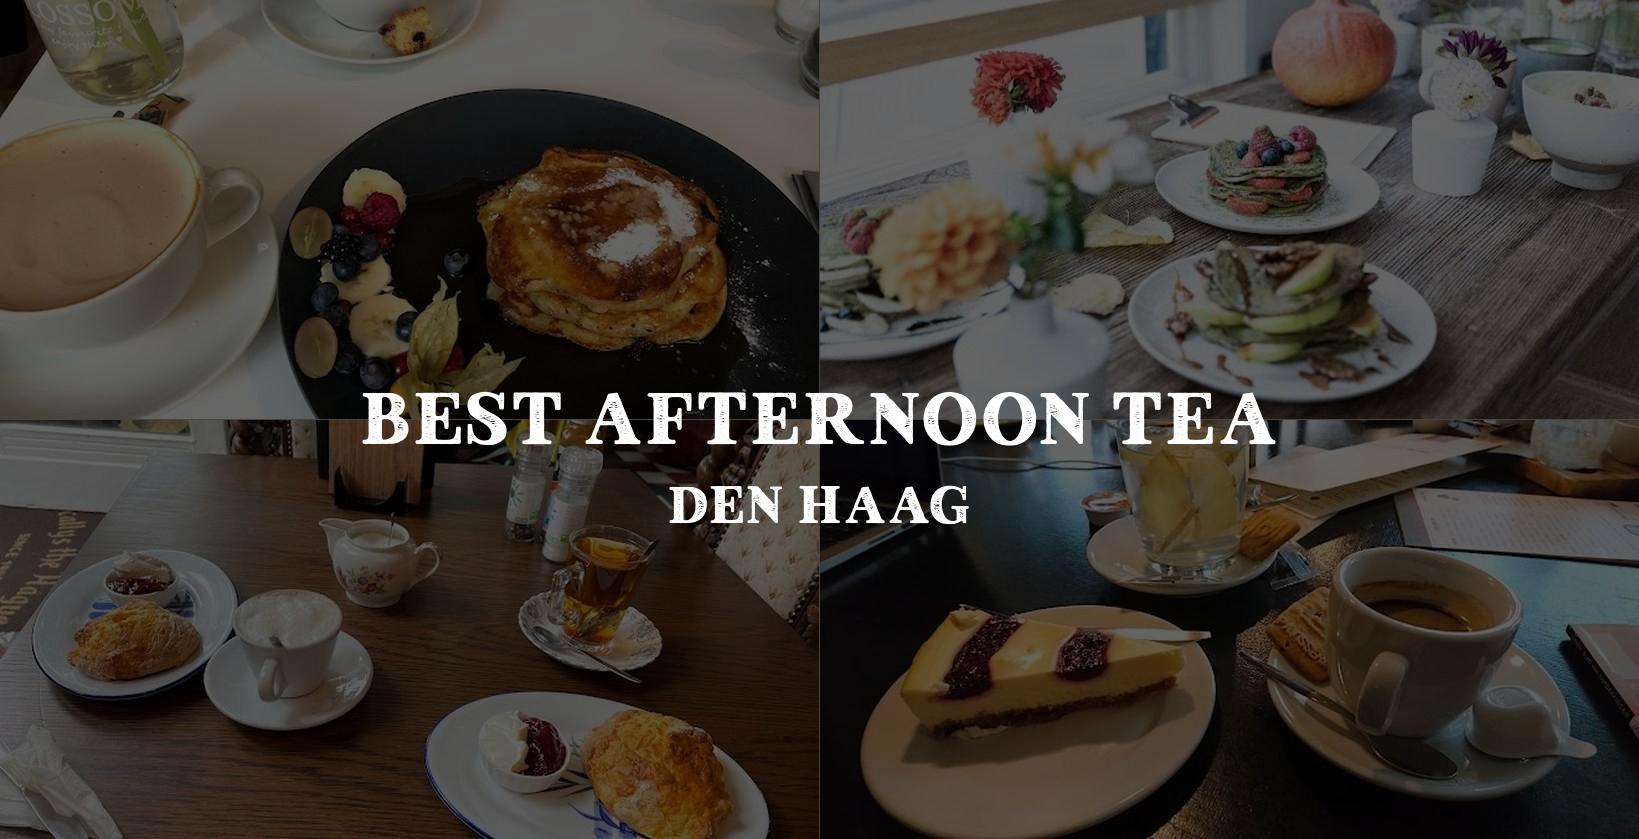 Choosing the perfect spot for afternoon tea in Den Haag